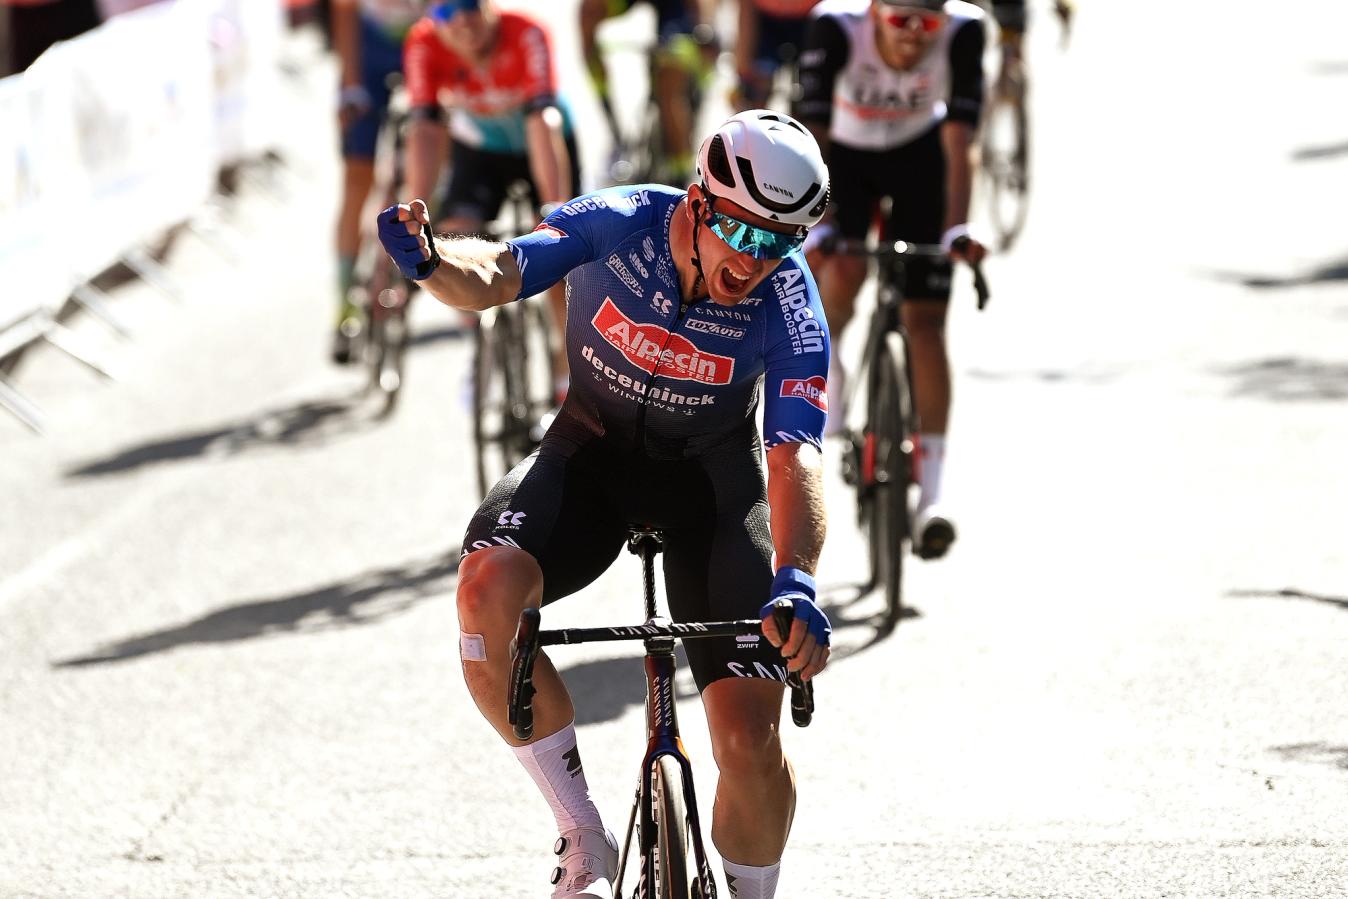 Groves celebrated taking his third Grand Tour victory with today's win at the Vuelta a España